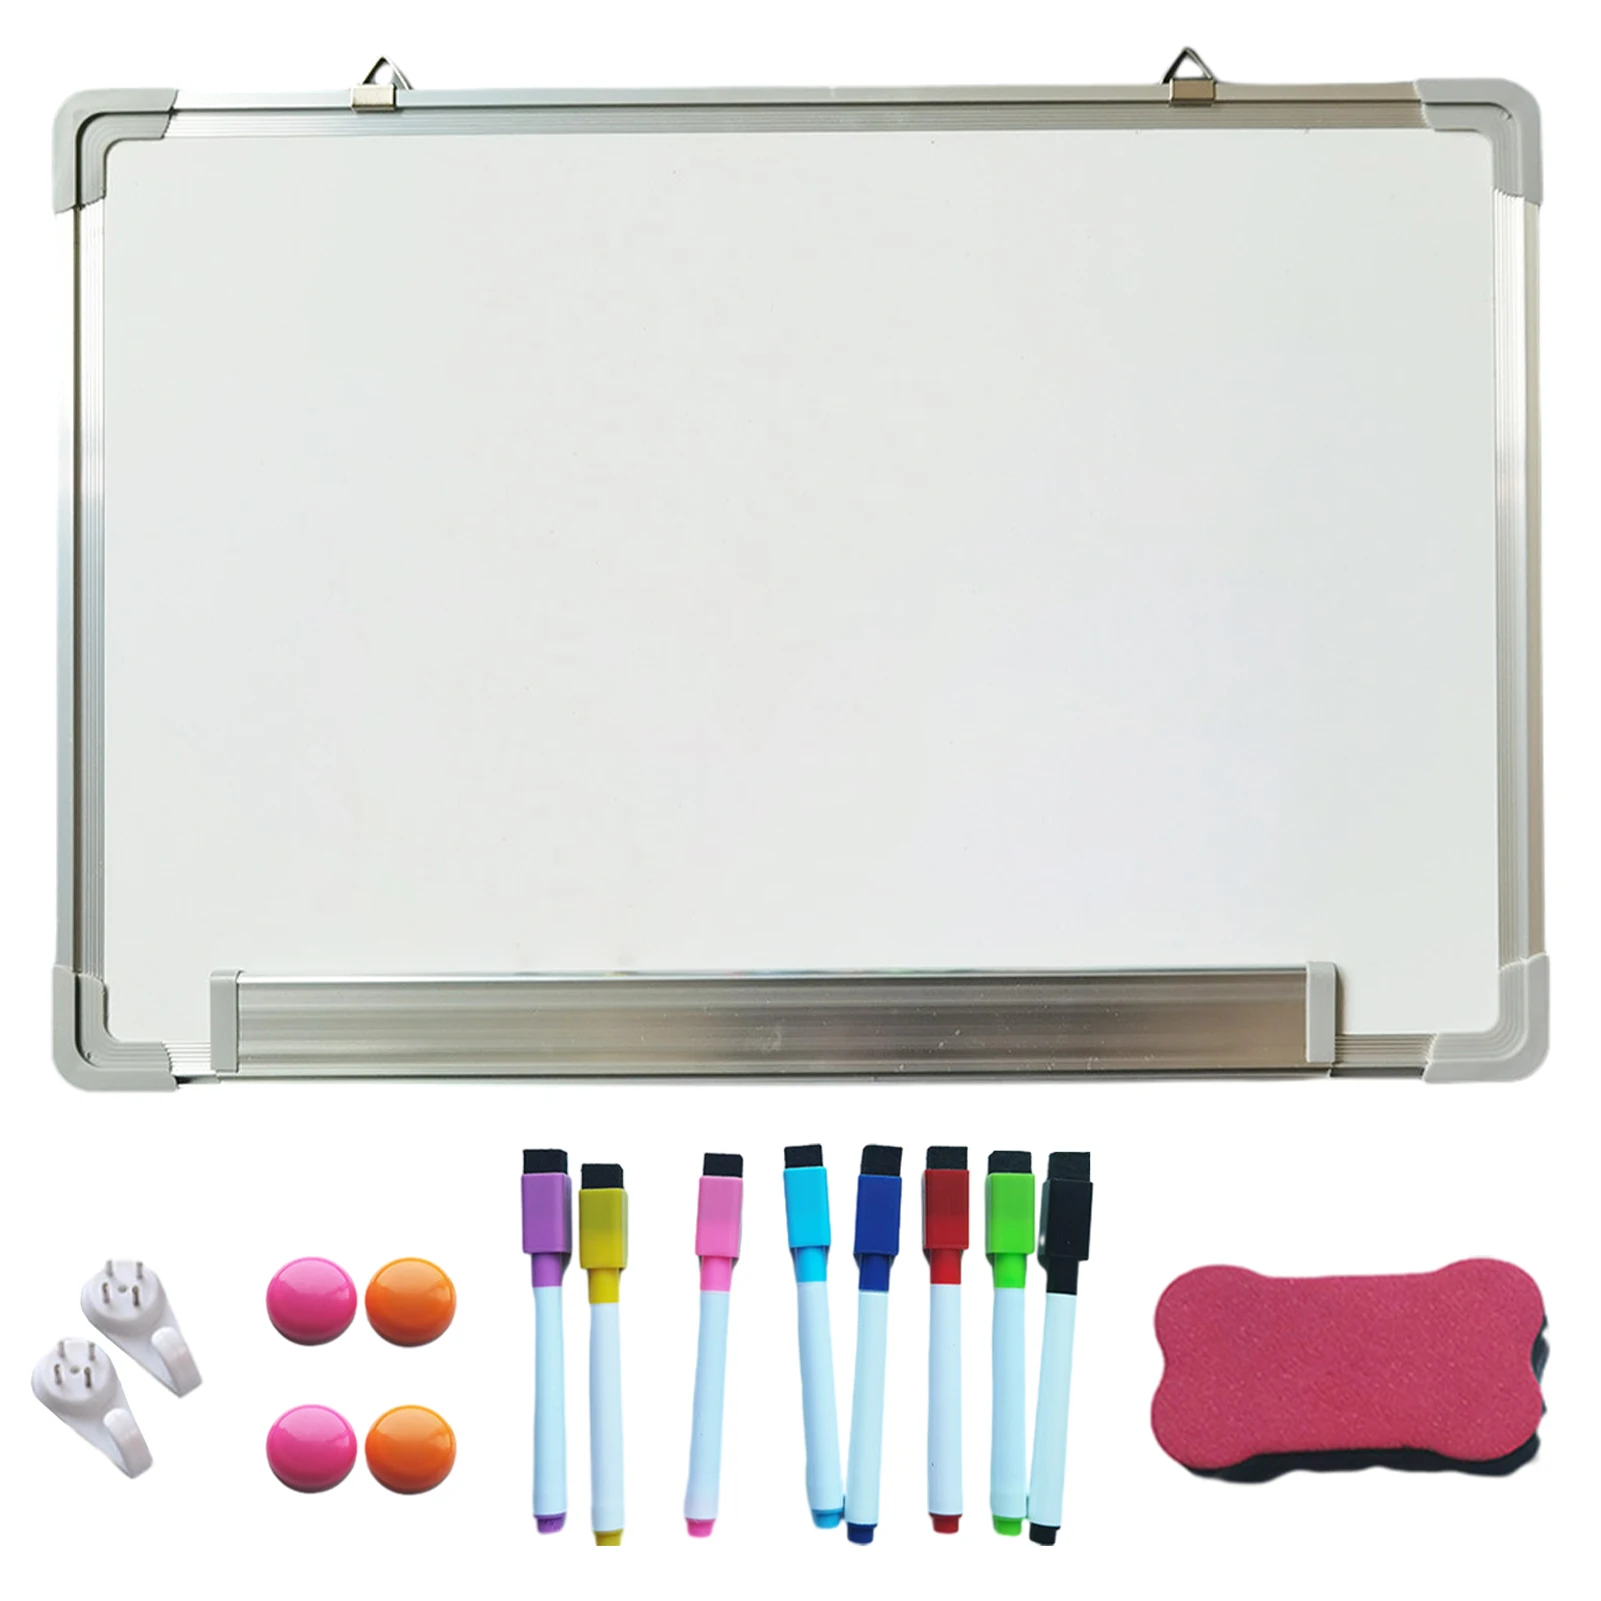 Alumínio Magnetic Whiteboard Markers, Dry Erase Pens,